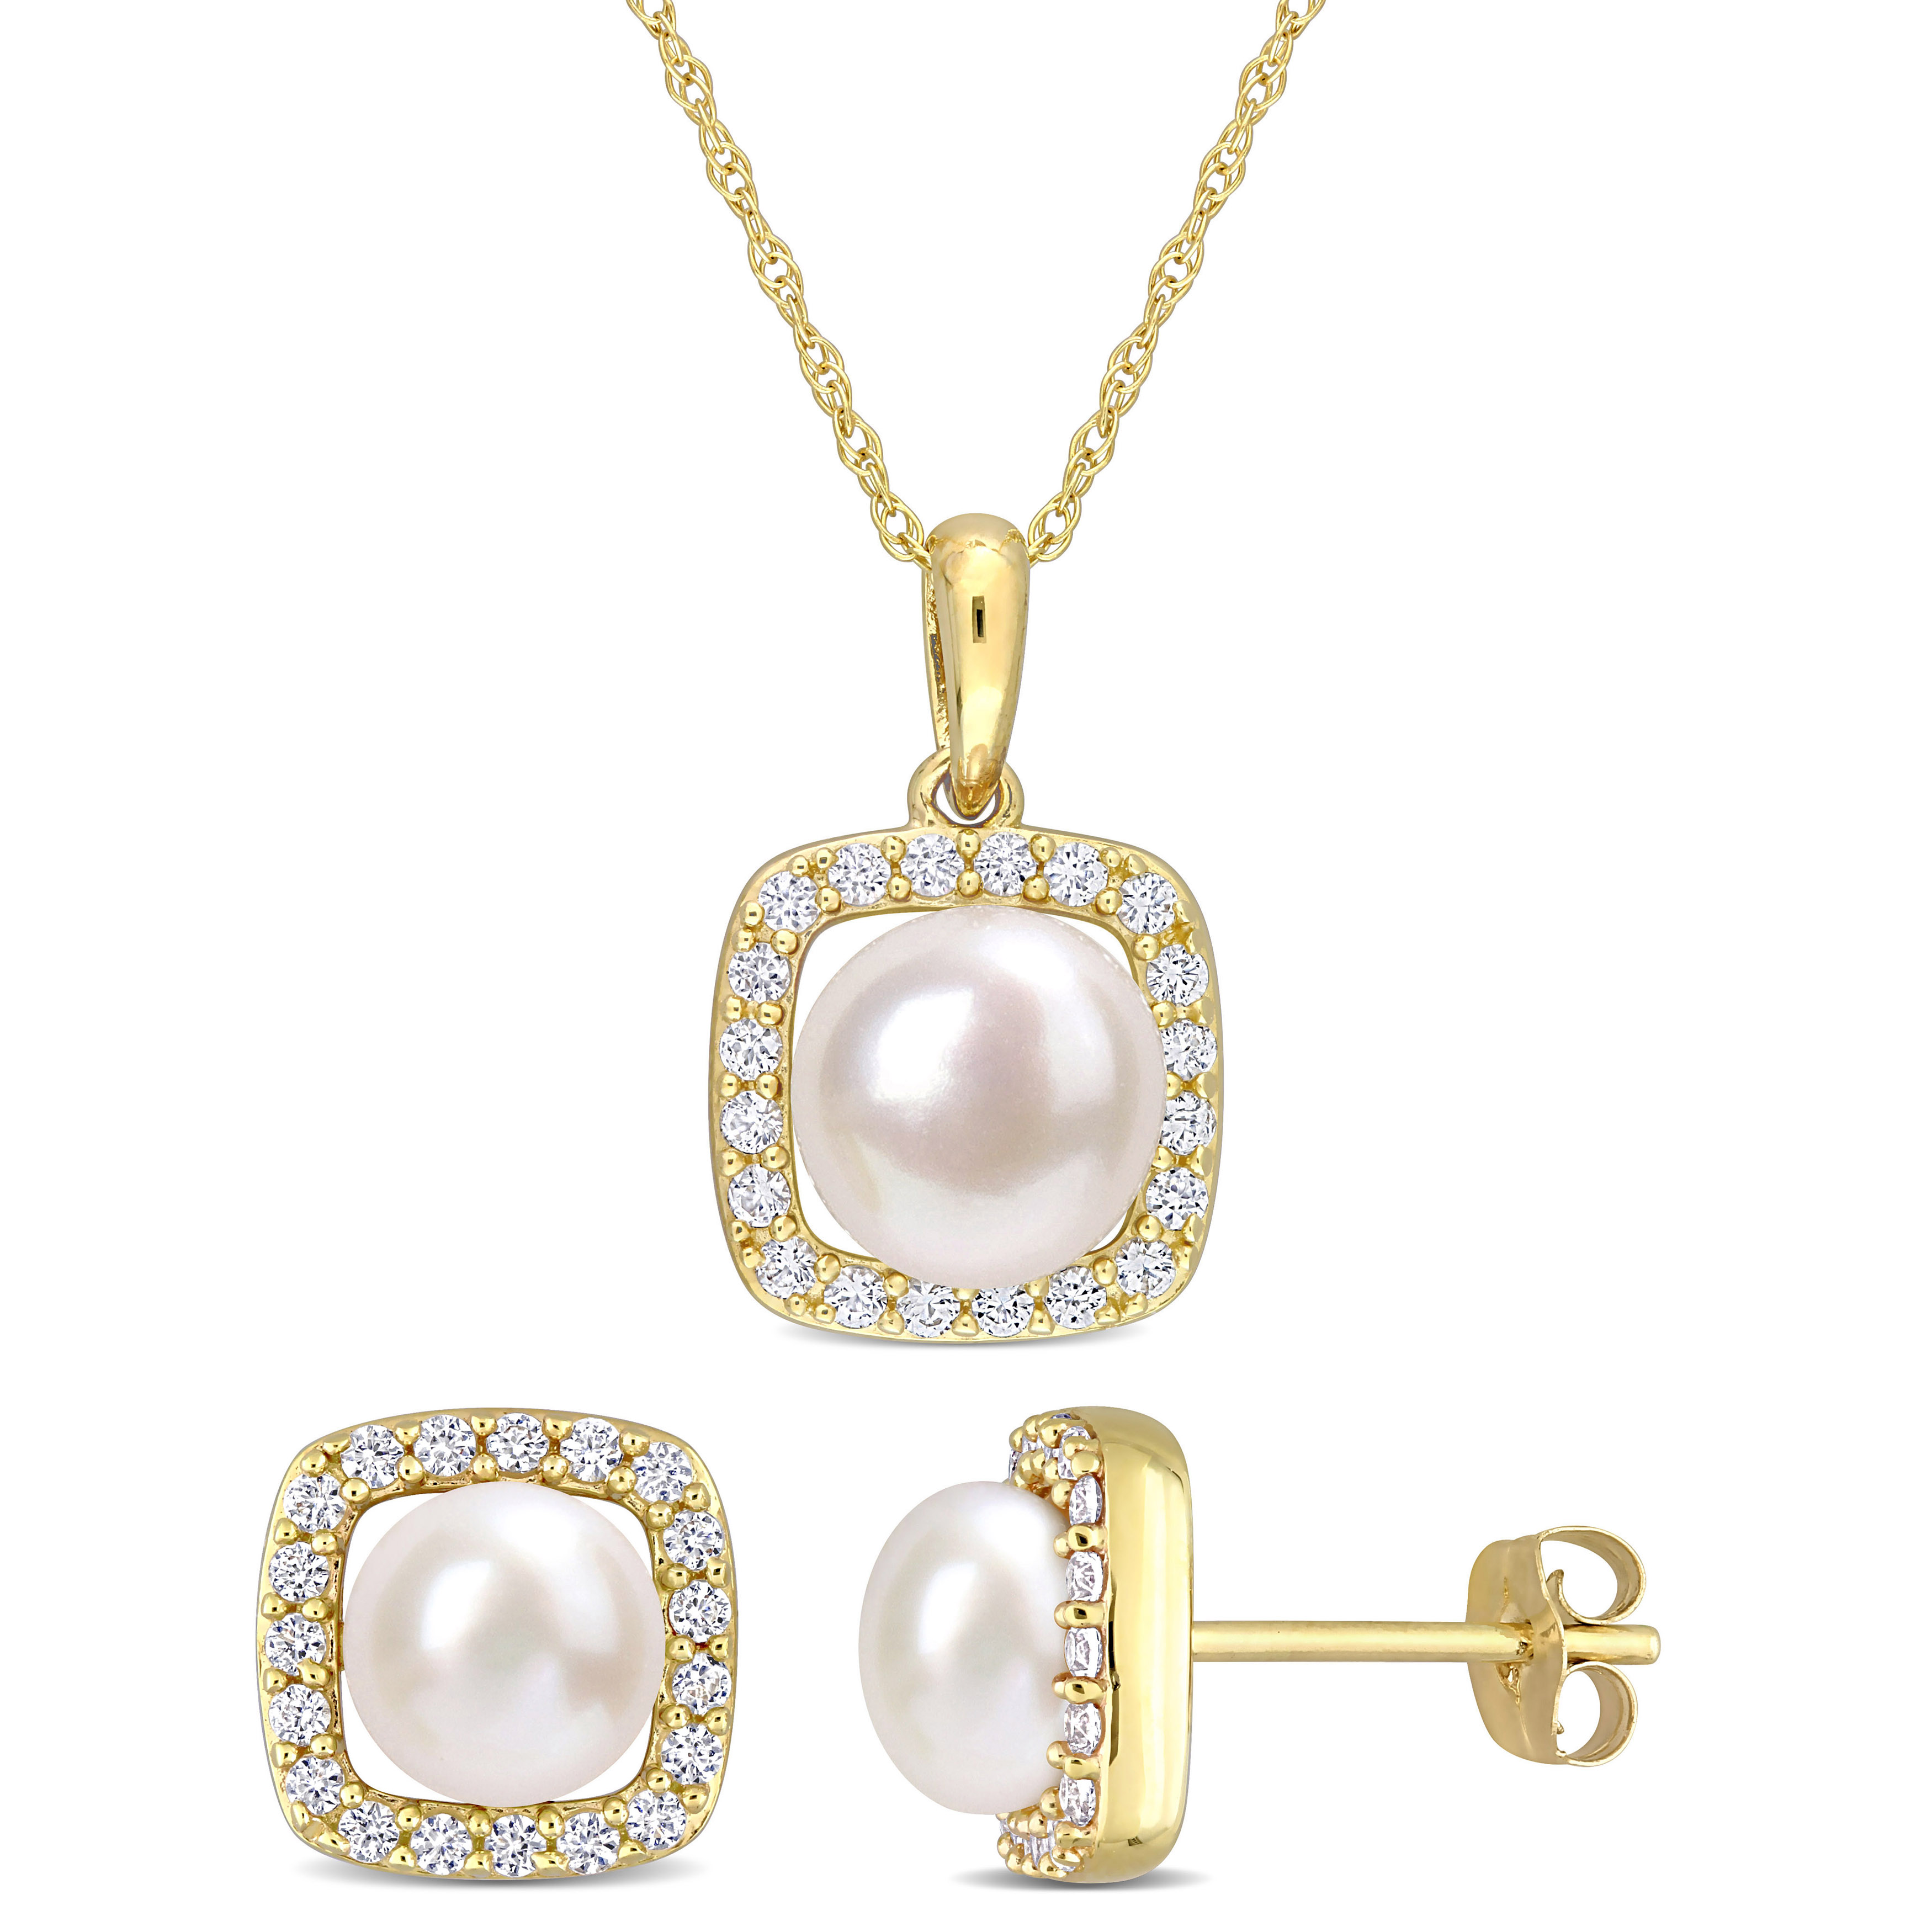 6-7.5 MM Cultured Freshwater Pearl and 3/5 CT TGW Created White Sapphire Necklace and Earrings 2-Piece Set in 10k Yellow Gold